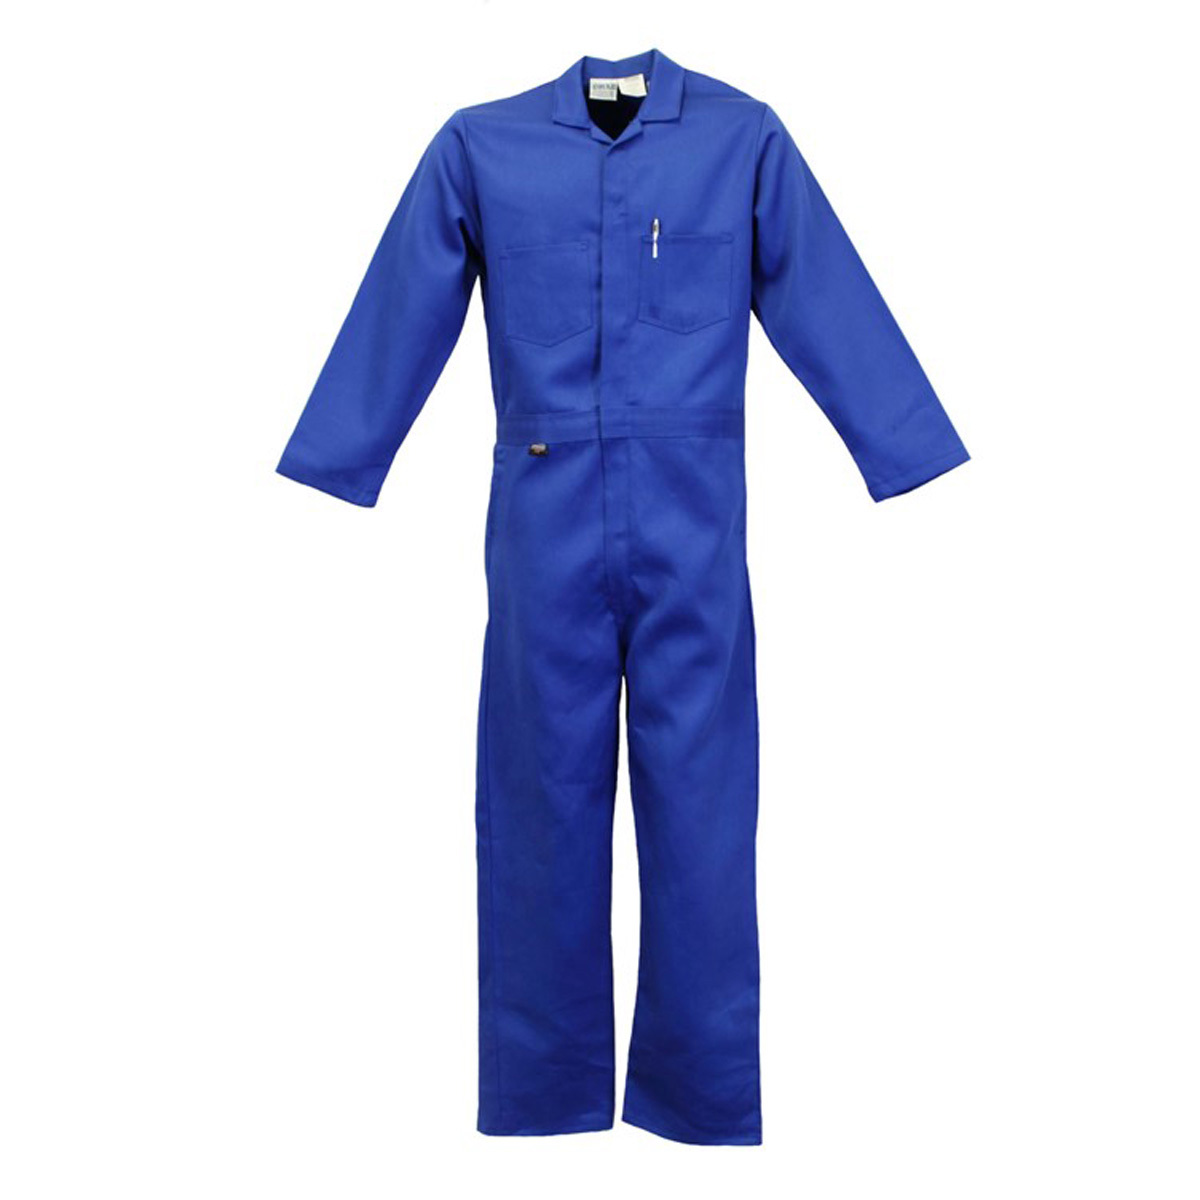 Stanco Safety Products™ Tall X-Large Royal Blue Indura® Arc Rated Flame Resistant Coveralls With Front Zipper Closure